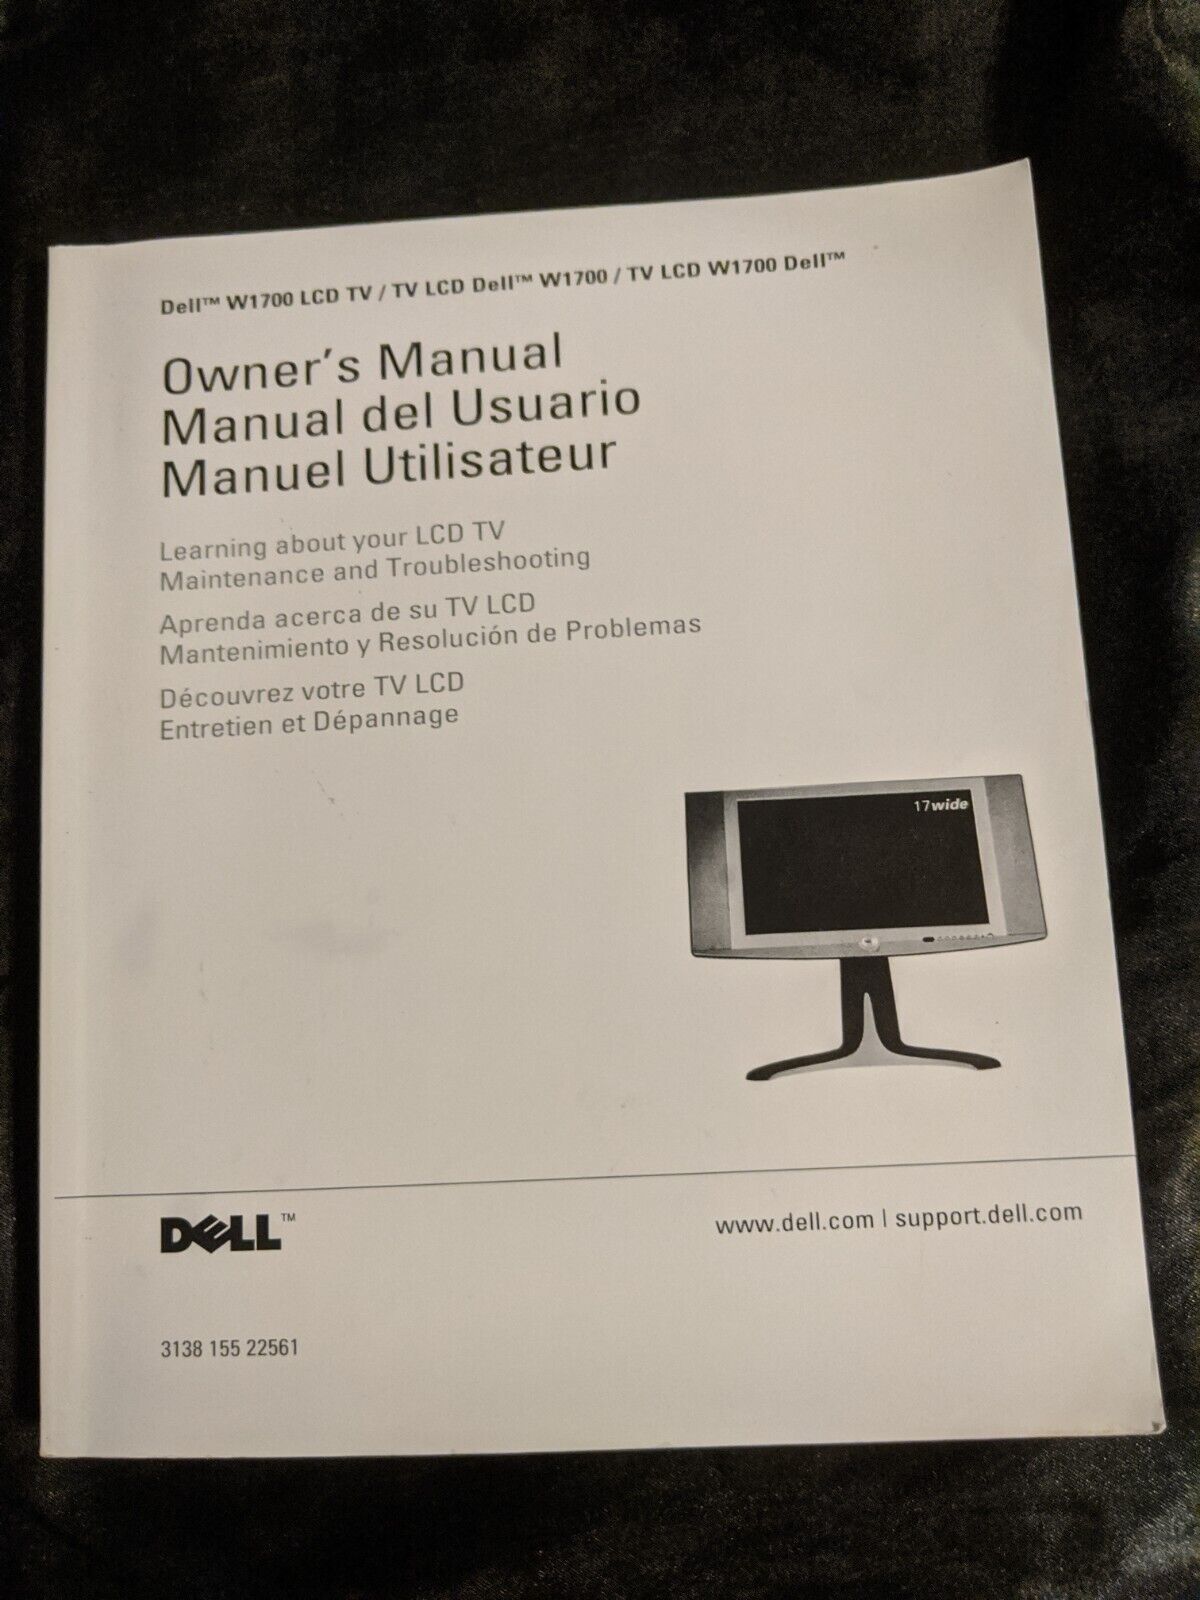 Dell W1700 LCD TV Owners Manual [paperback] various [Jan 01, 2003]… - $21.77